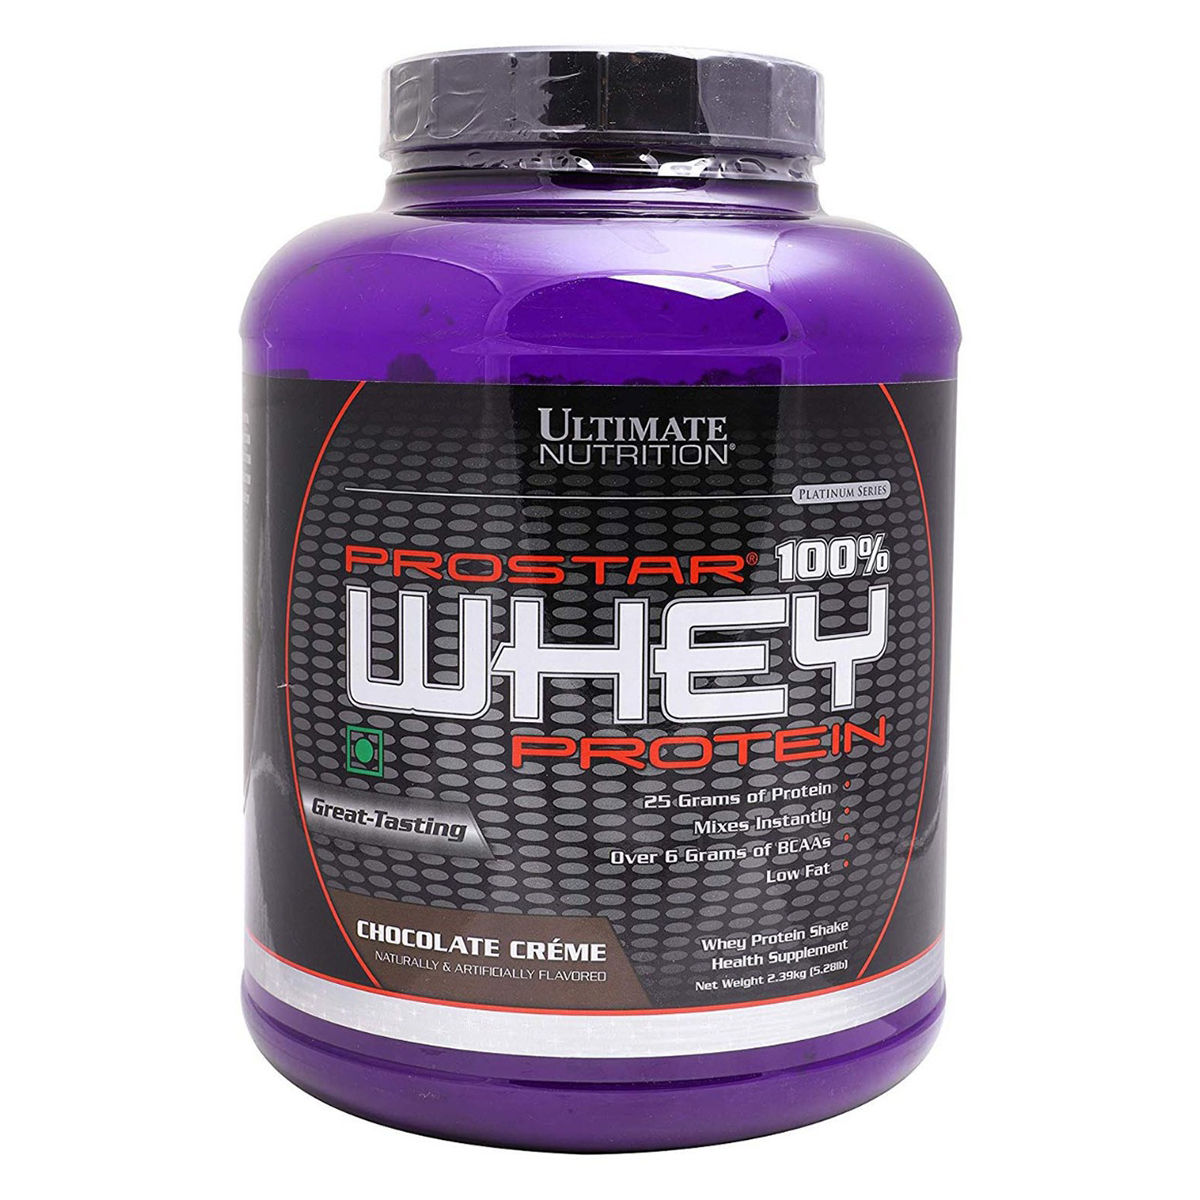 Buy Ultimate Nutrition Prostar 100% Whey Protein Chocolate Creme Flavour Powder, 5.28 lb Online